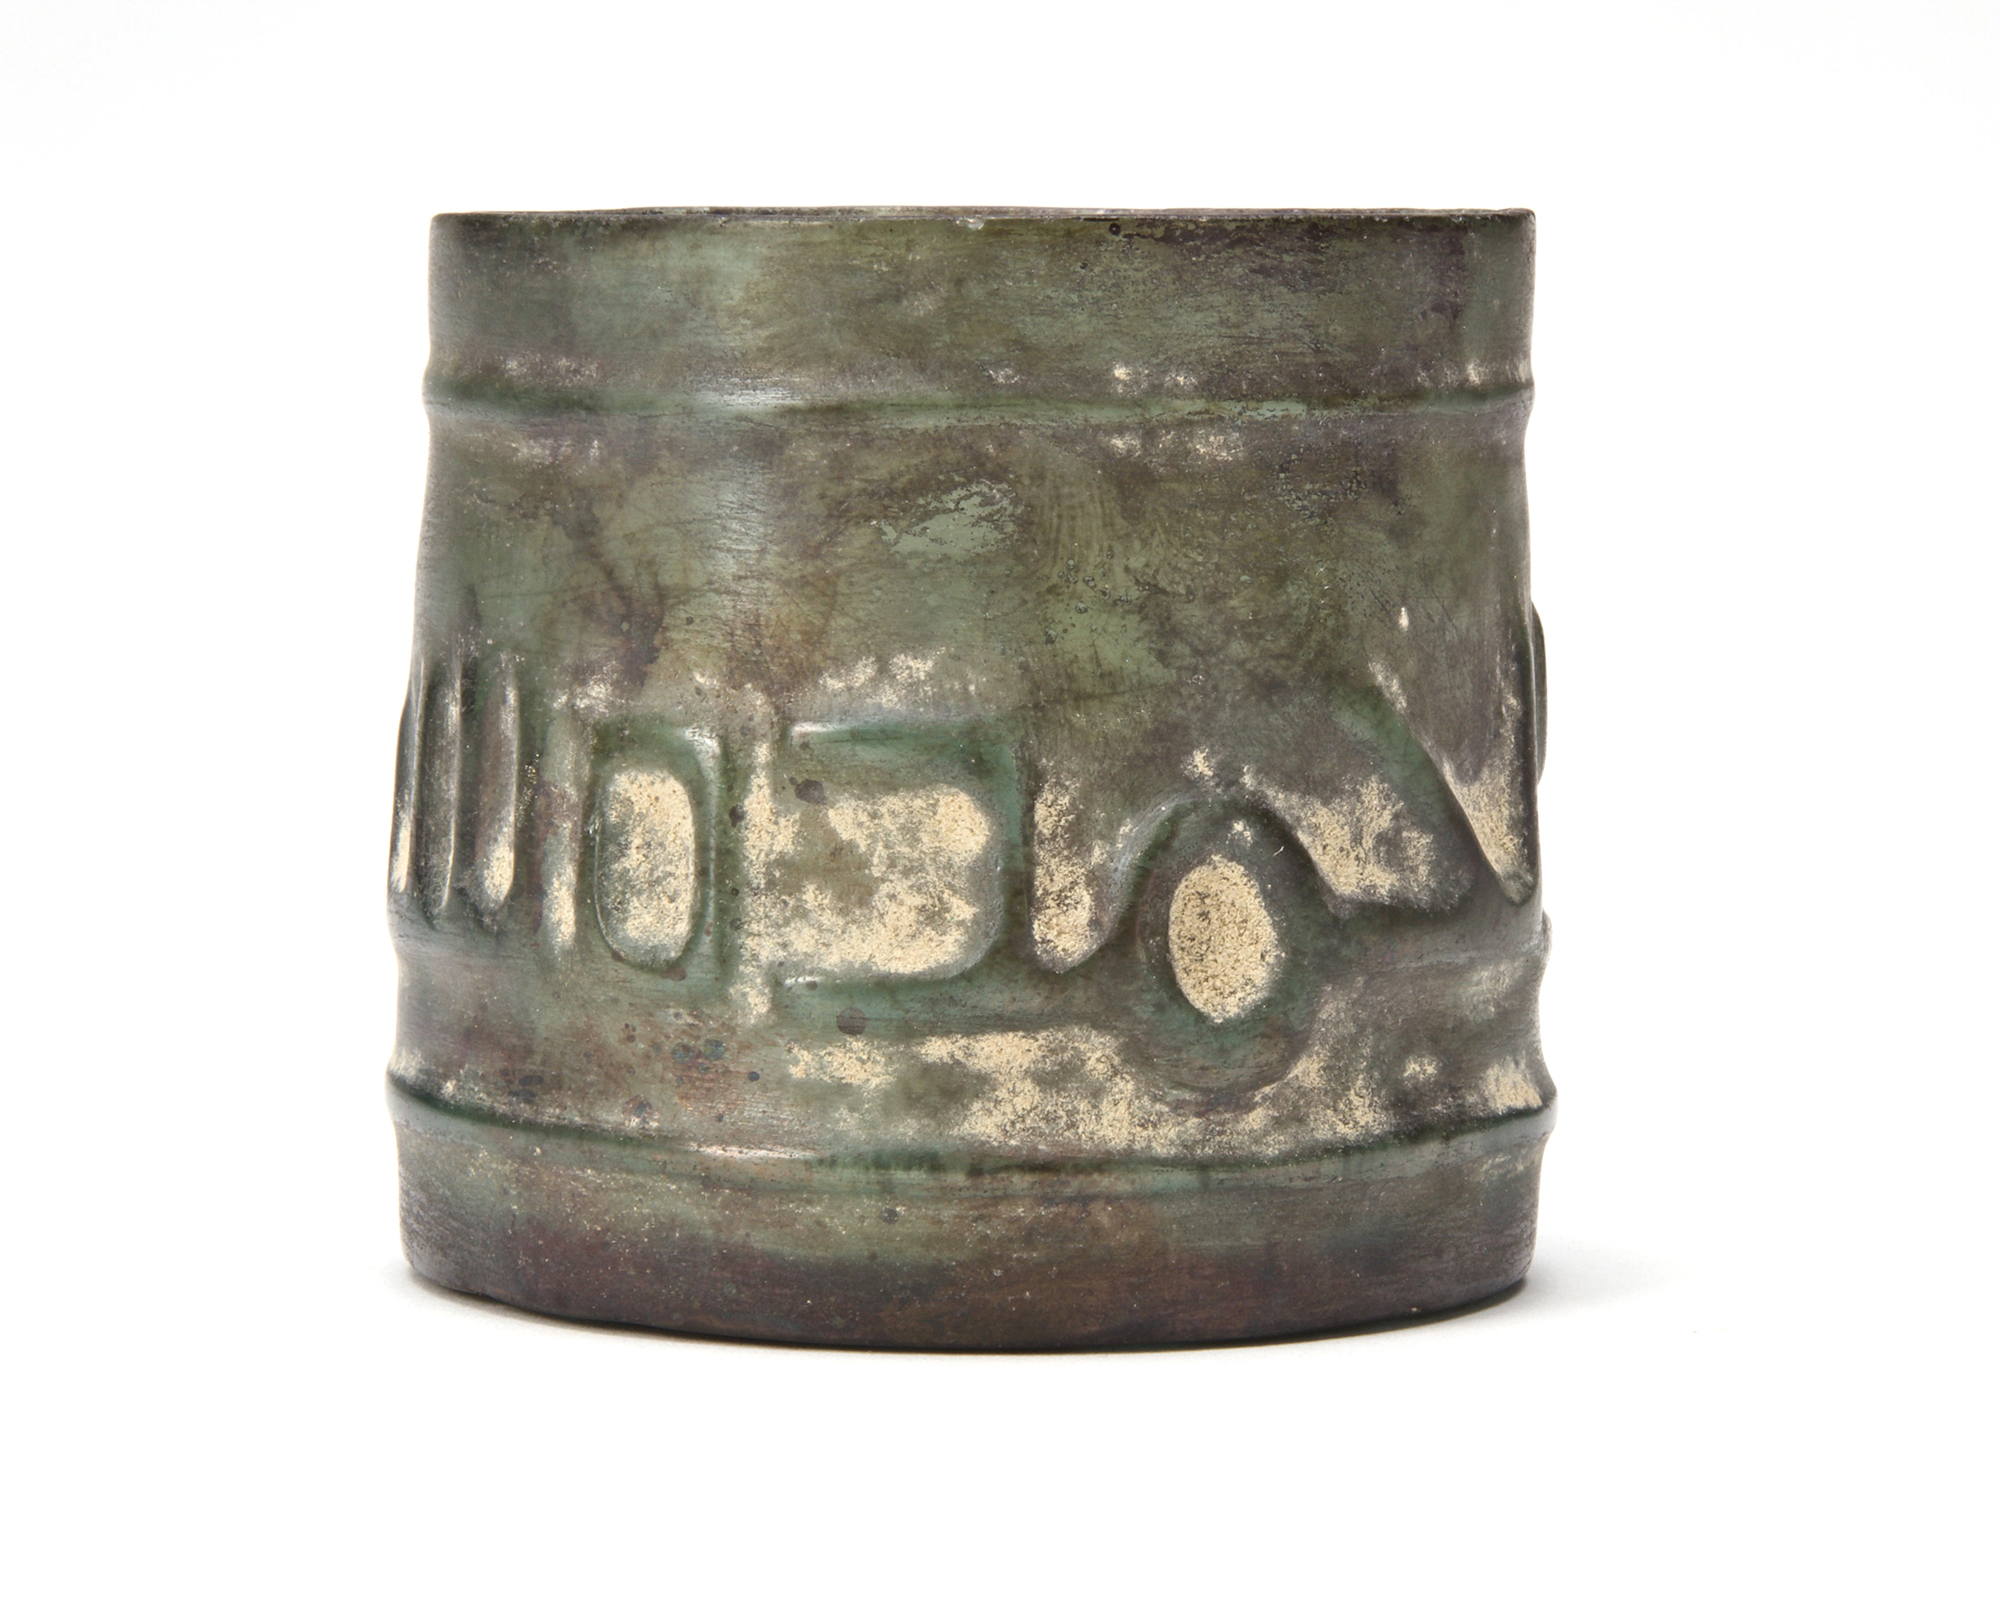 A GLASS BEAKER, SYRIA, 10TH-11TH CENTURY - Image 7 of 14